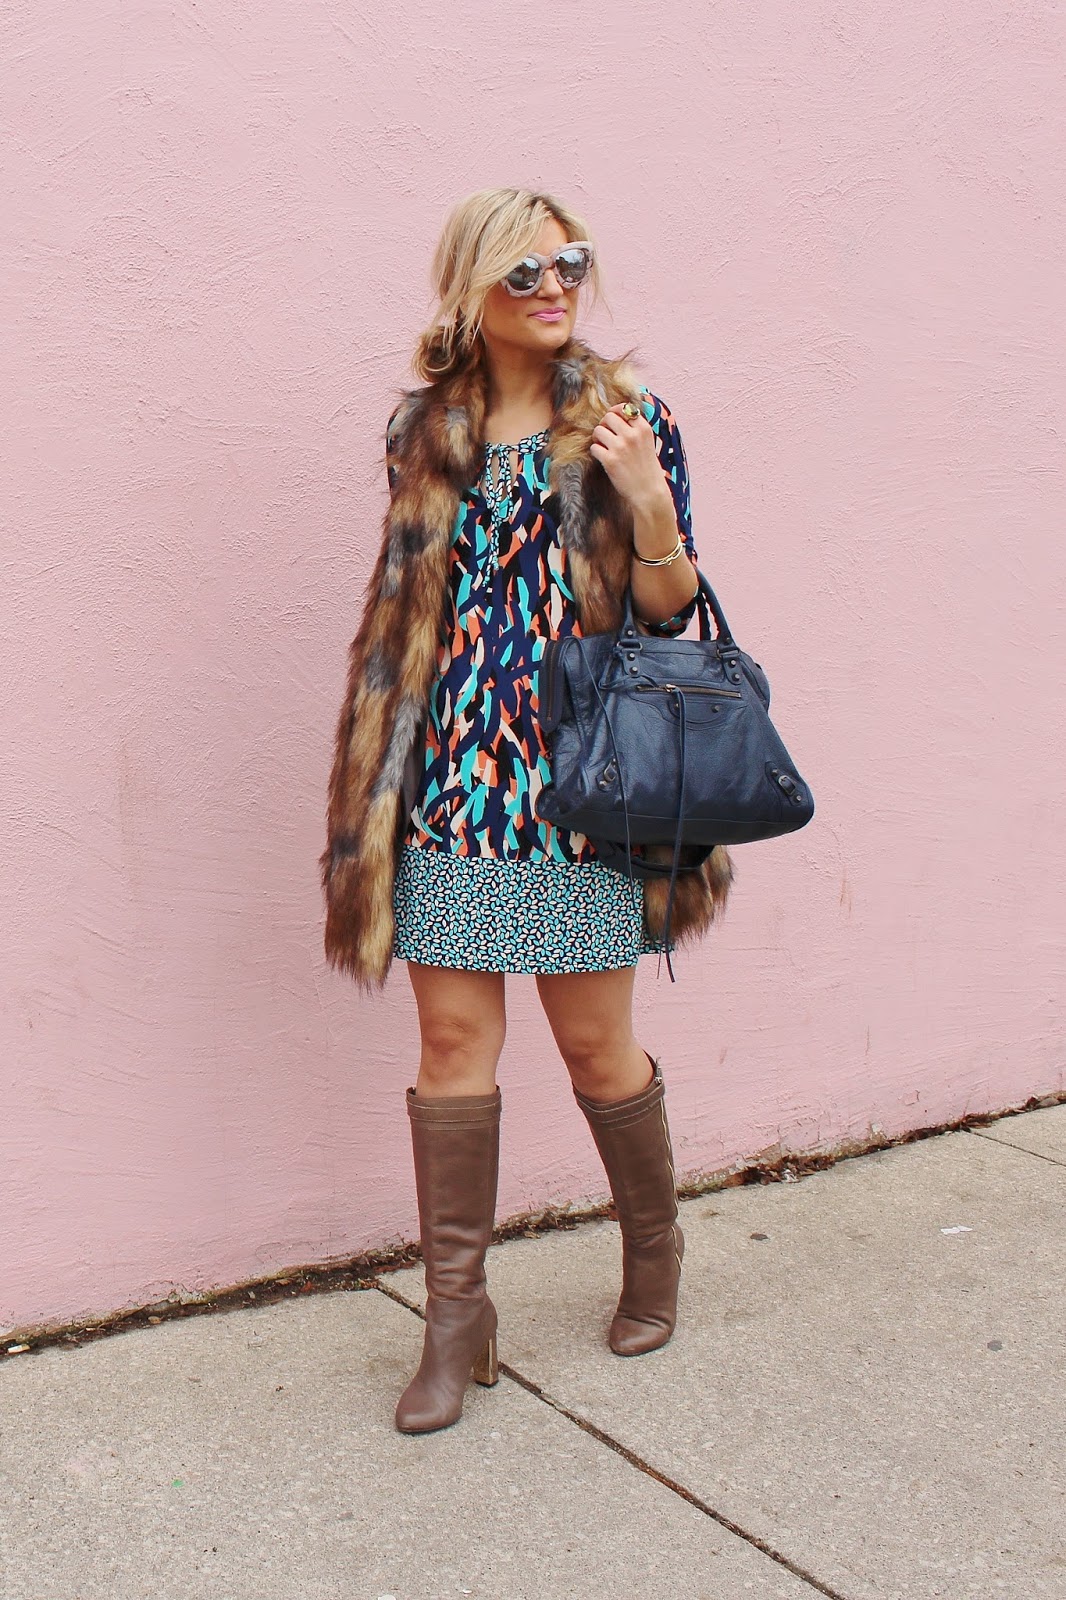 Bijuleni - How to Style a Summer Dress in Winter- Leota dress, Ann Taylor boots, fur vest and Balenciaga Bag